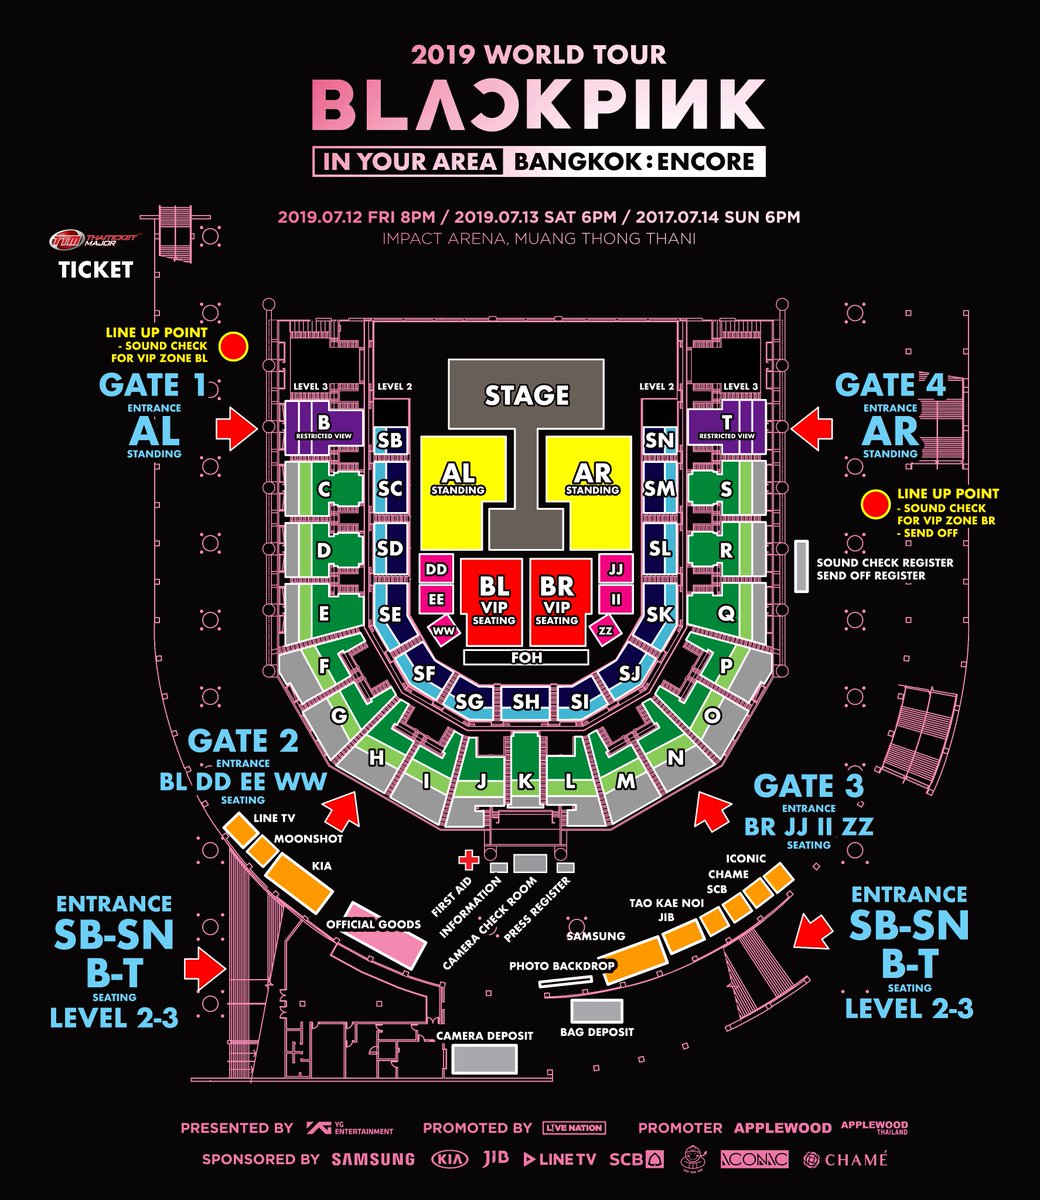 Applewood On Twitter Thailand Blinks 2 Days Left For Blackpink 2019 World Tour In Your Area Bangkok Encore Please Take Note Of The Following Details And Also The Rules And Regulations